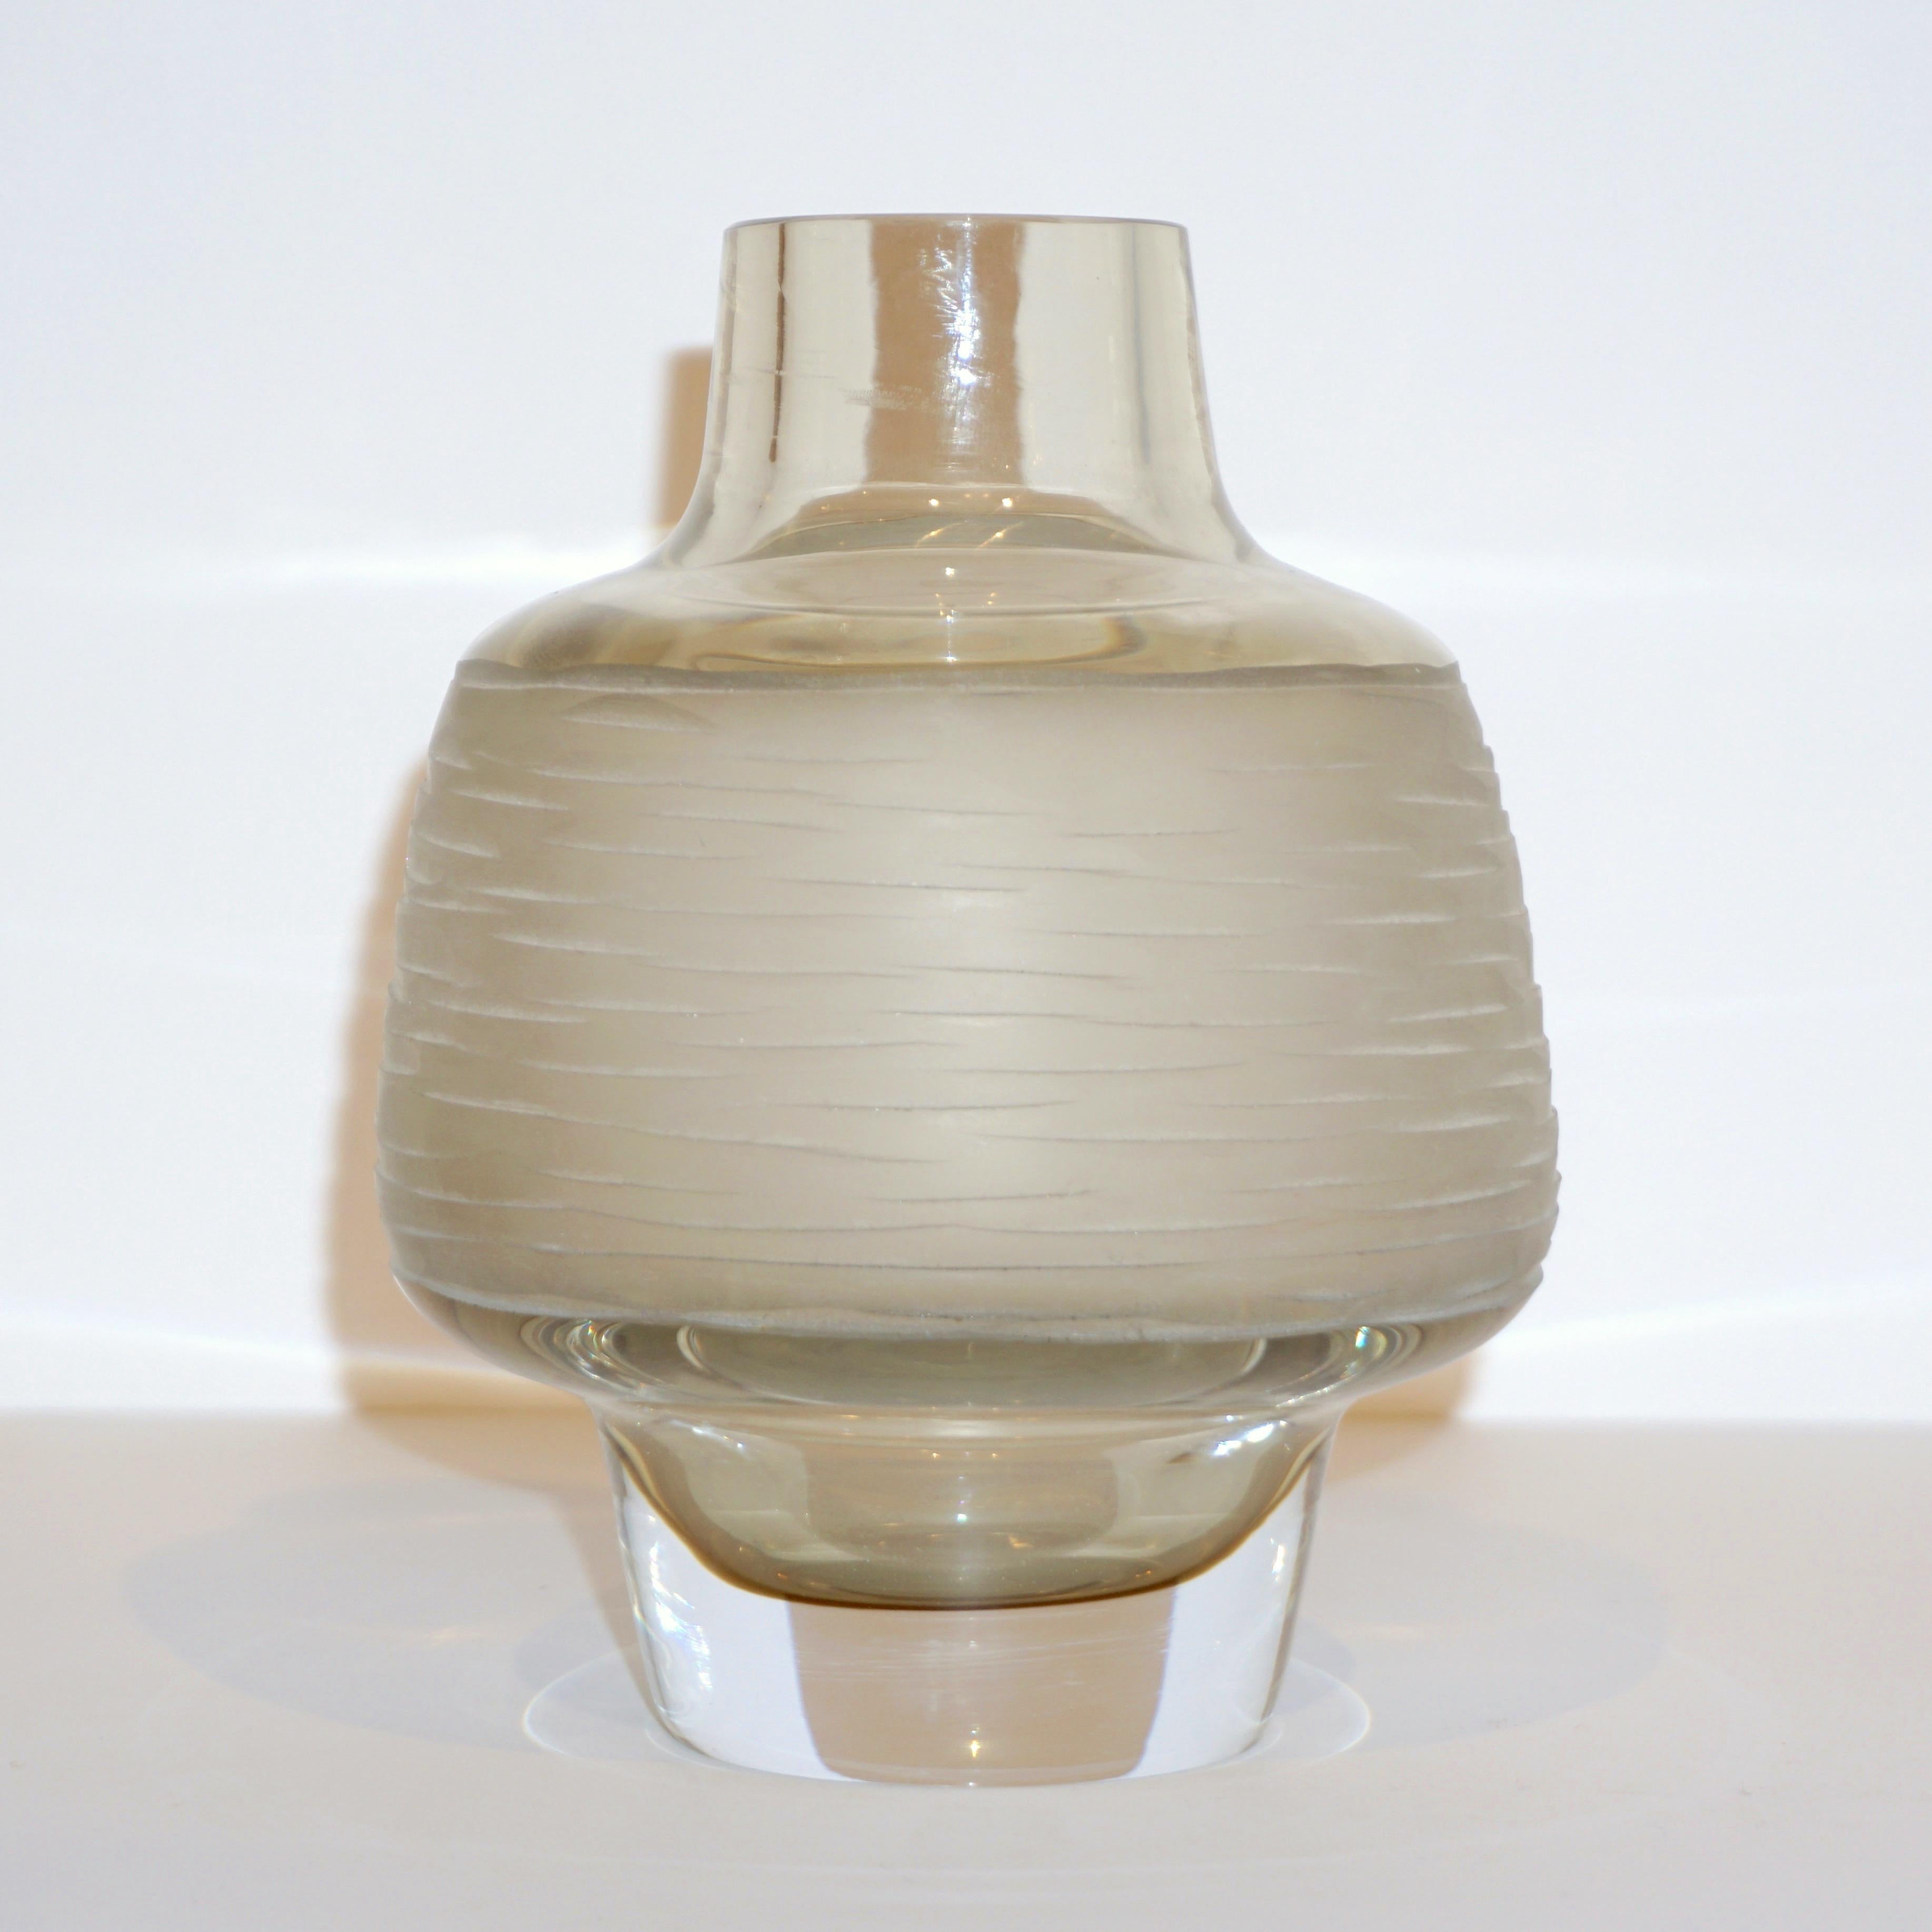 1970s elegant Venetian small flower vase of organic round shape, finishing with a clear collar neck, blown by Formia in Sommerso Murano glass with a refined smoked light amber beige color highlighted by a delicate pink rose reflection and overlaid